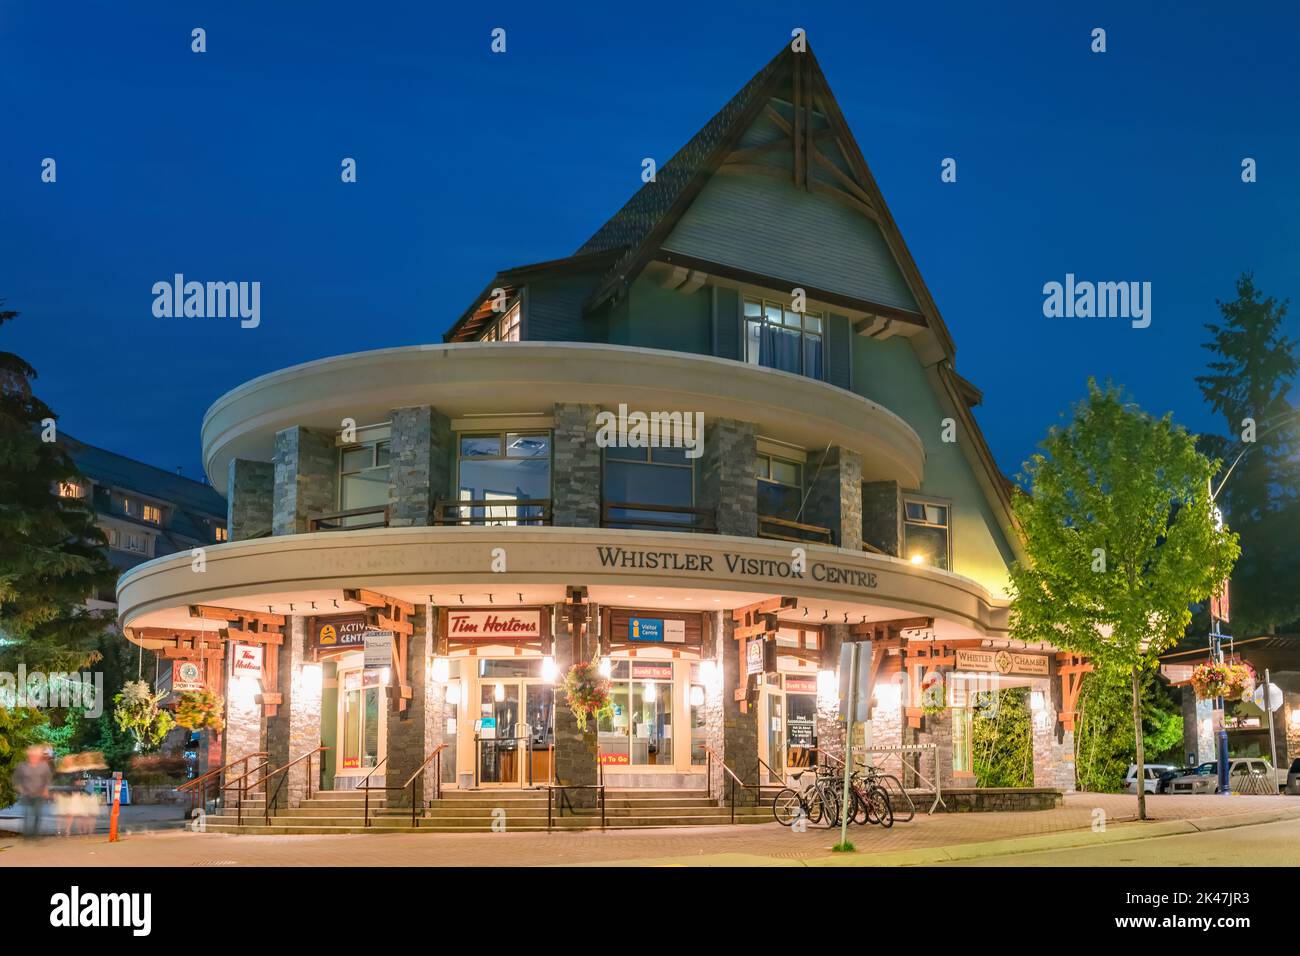 Pedestrians walk past the Visitor Centre in Whistler Village, BC, Canada at night. Stock Photo